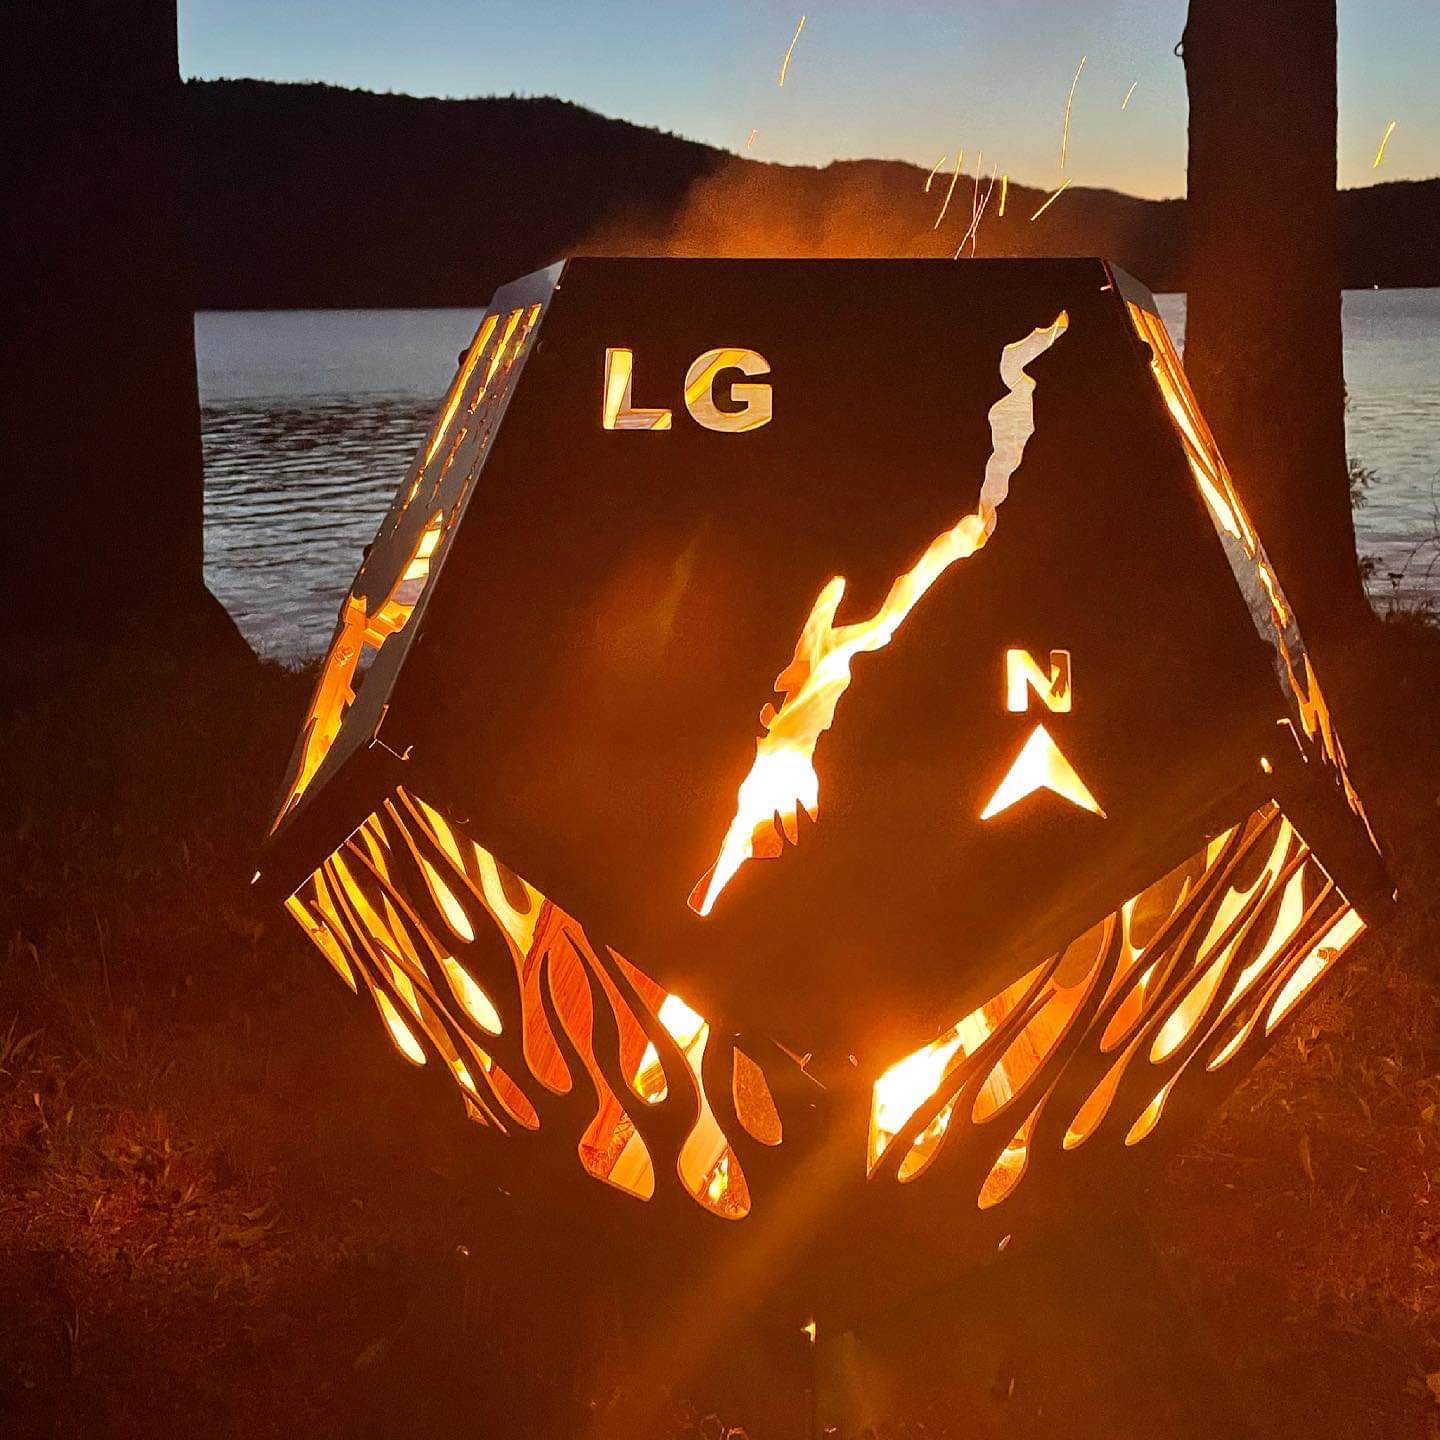  Personalized Fire Pits by Insane Fire Pits